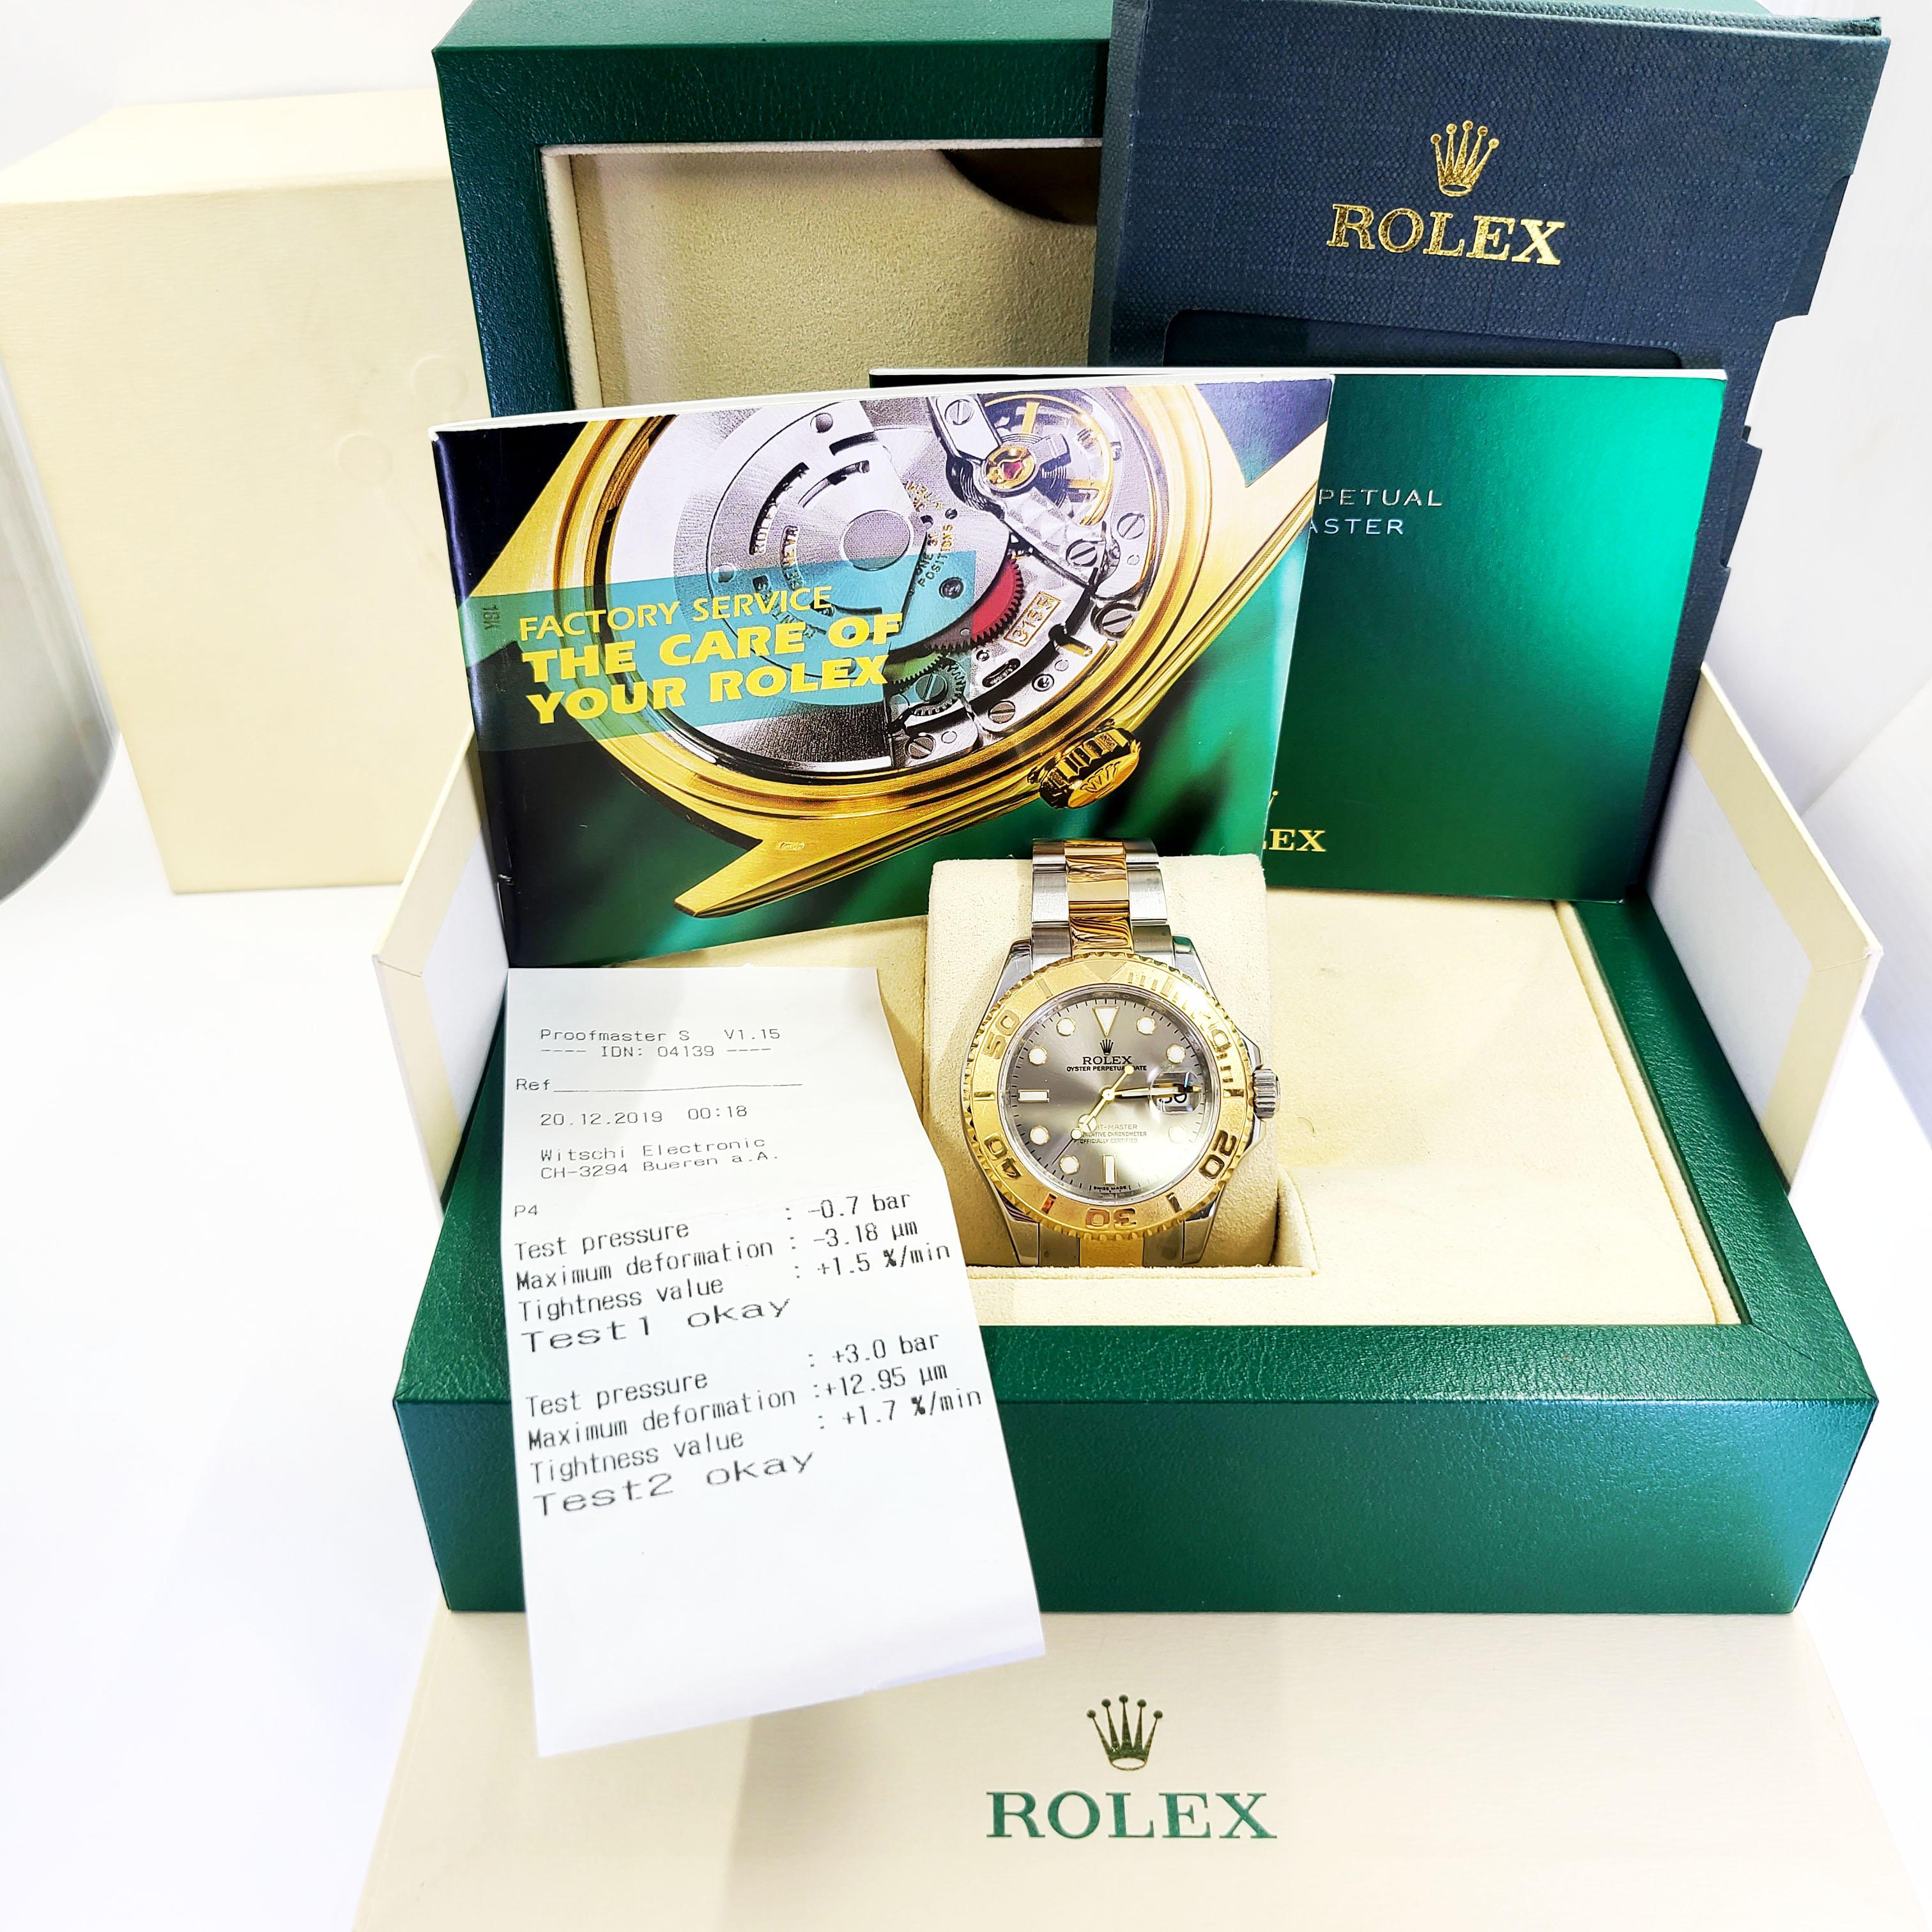 Pre-Owned 18 Karat Yellow Gold & Stainless Steel 40mm Rolex Yachtmaster Automatic Wristwatch On Oyster Bracelet With Silver Dial. Model #16623, V Serial Circa 2009. Includes Original Box, Booklets, and 1 Year Timekeeping Warranty.